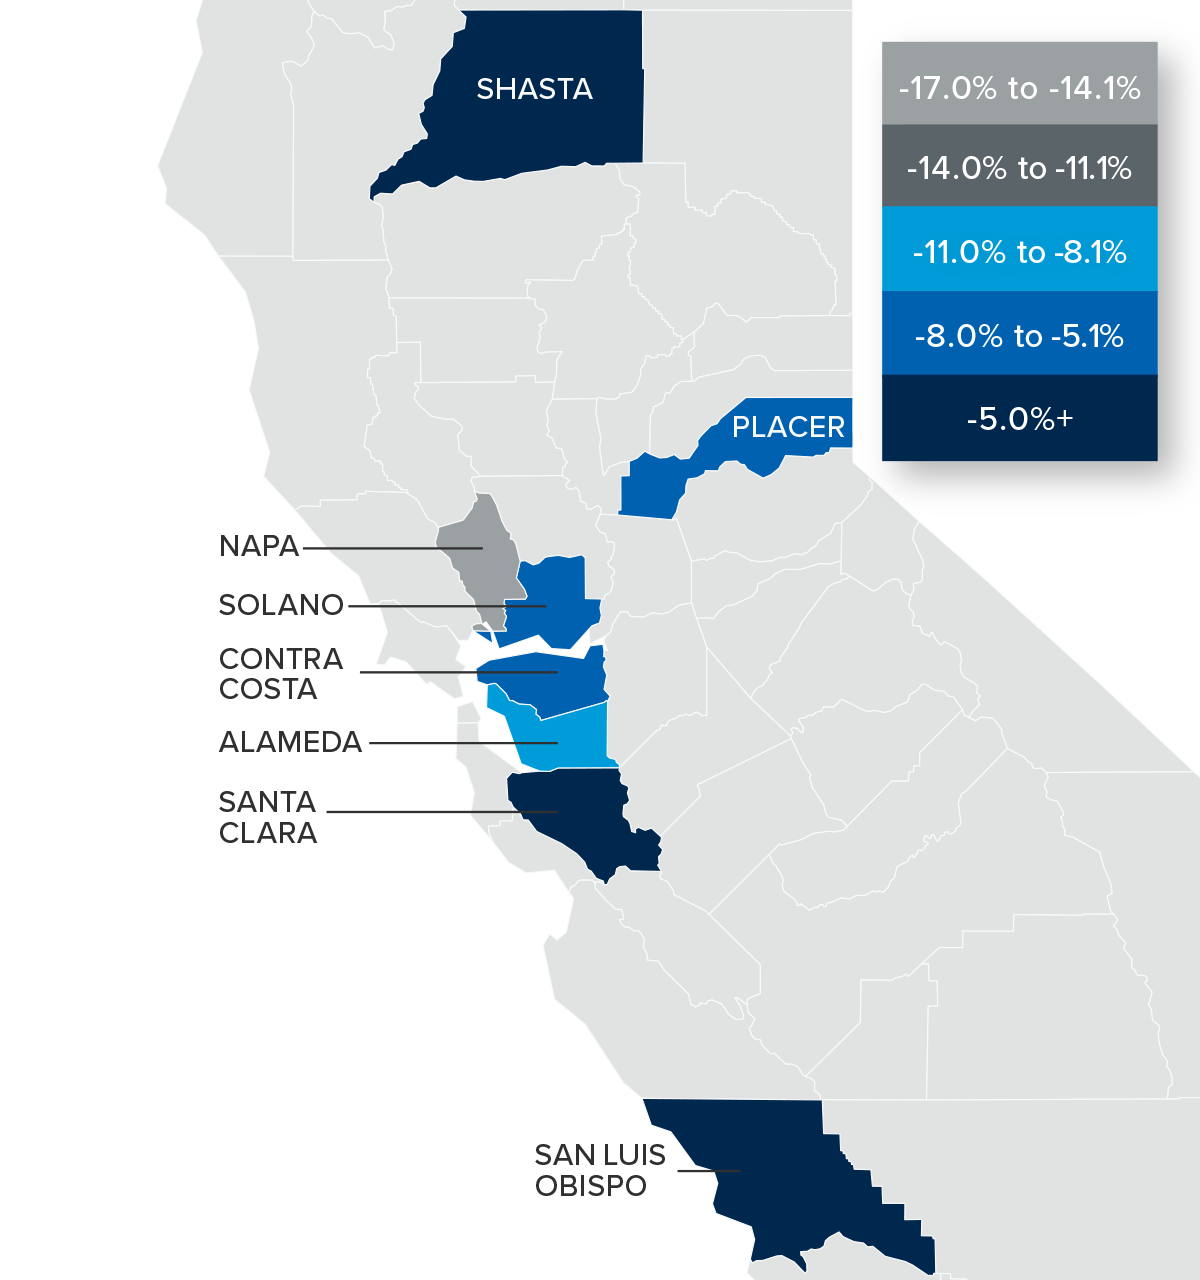 A map showing the real estate home prices percentage changes for various counties in Northern California. Different colors correspond to different tiers of percentage change. Napa had a percentage change in the -17% to -14.1% range. Alameda was in the -11% to -8.1% change range. Placer, Solano, and Contra Costa were in the -8% to -5.1% change range. Shasta, Santa Clara, and San Luis Obispo were in the -5%+ change range.